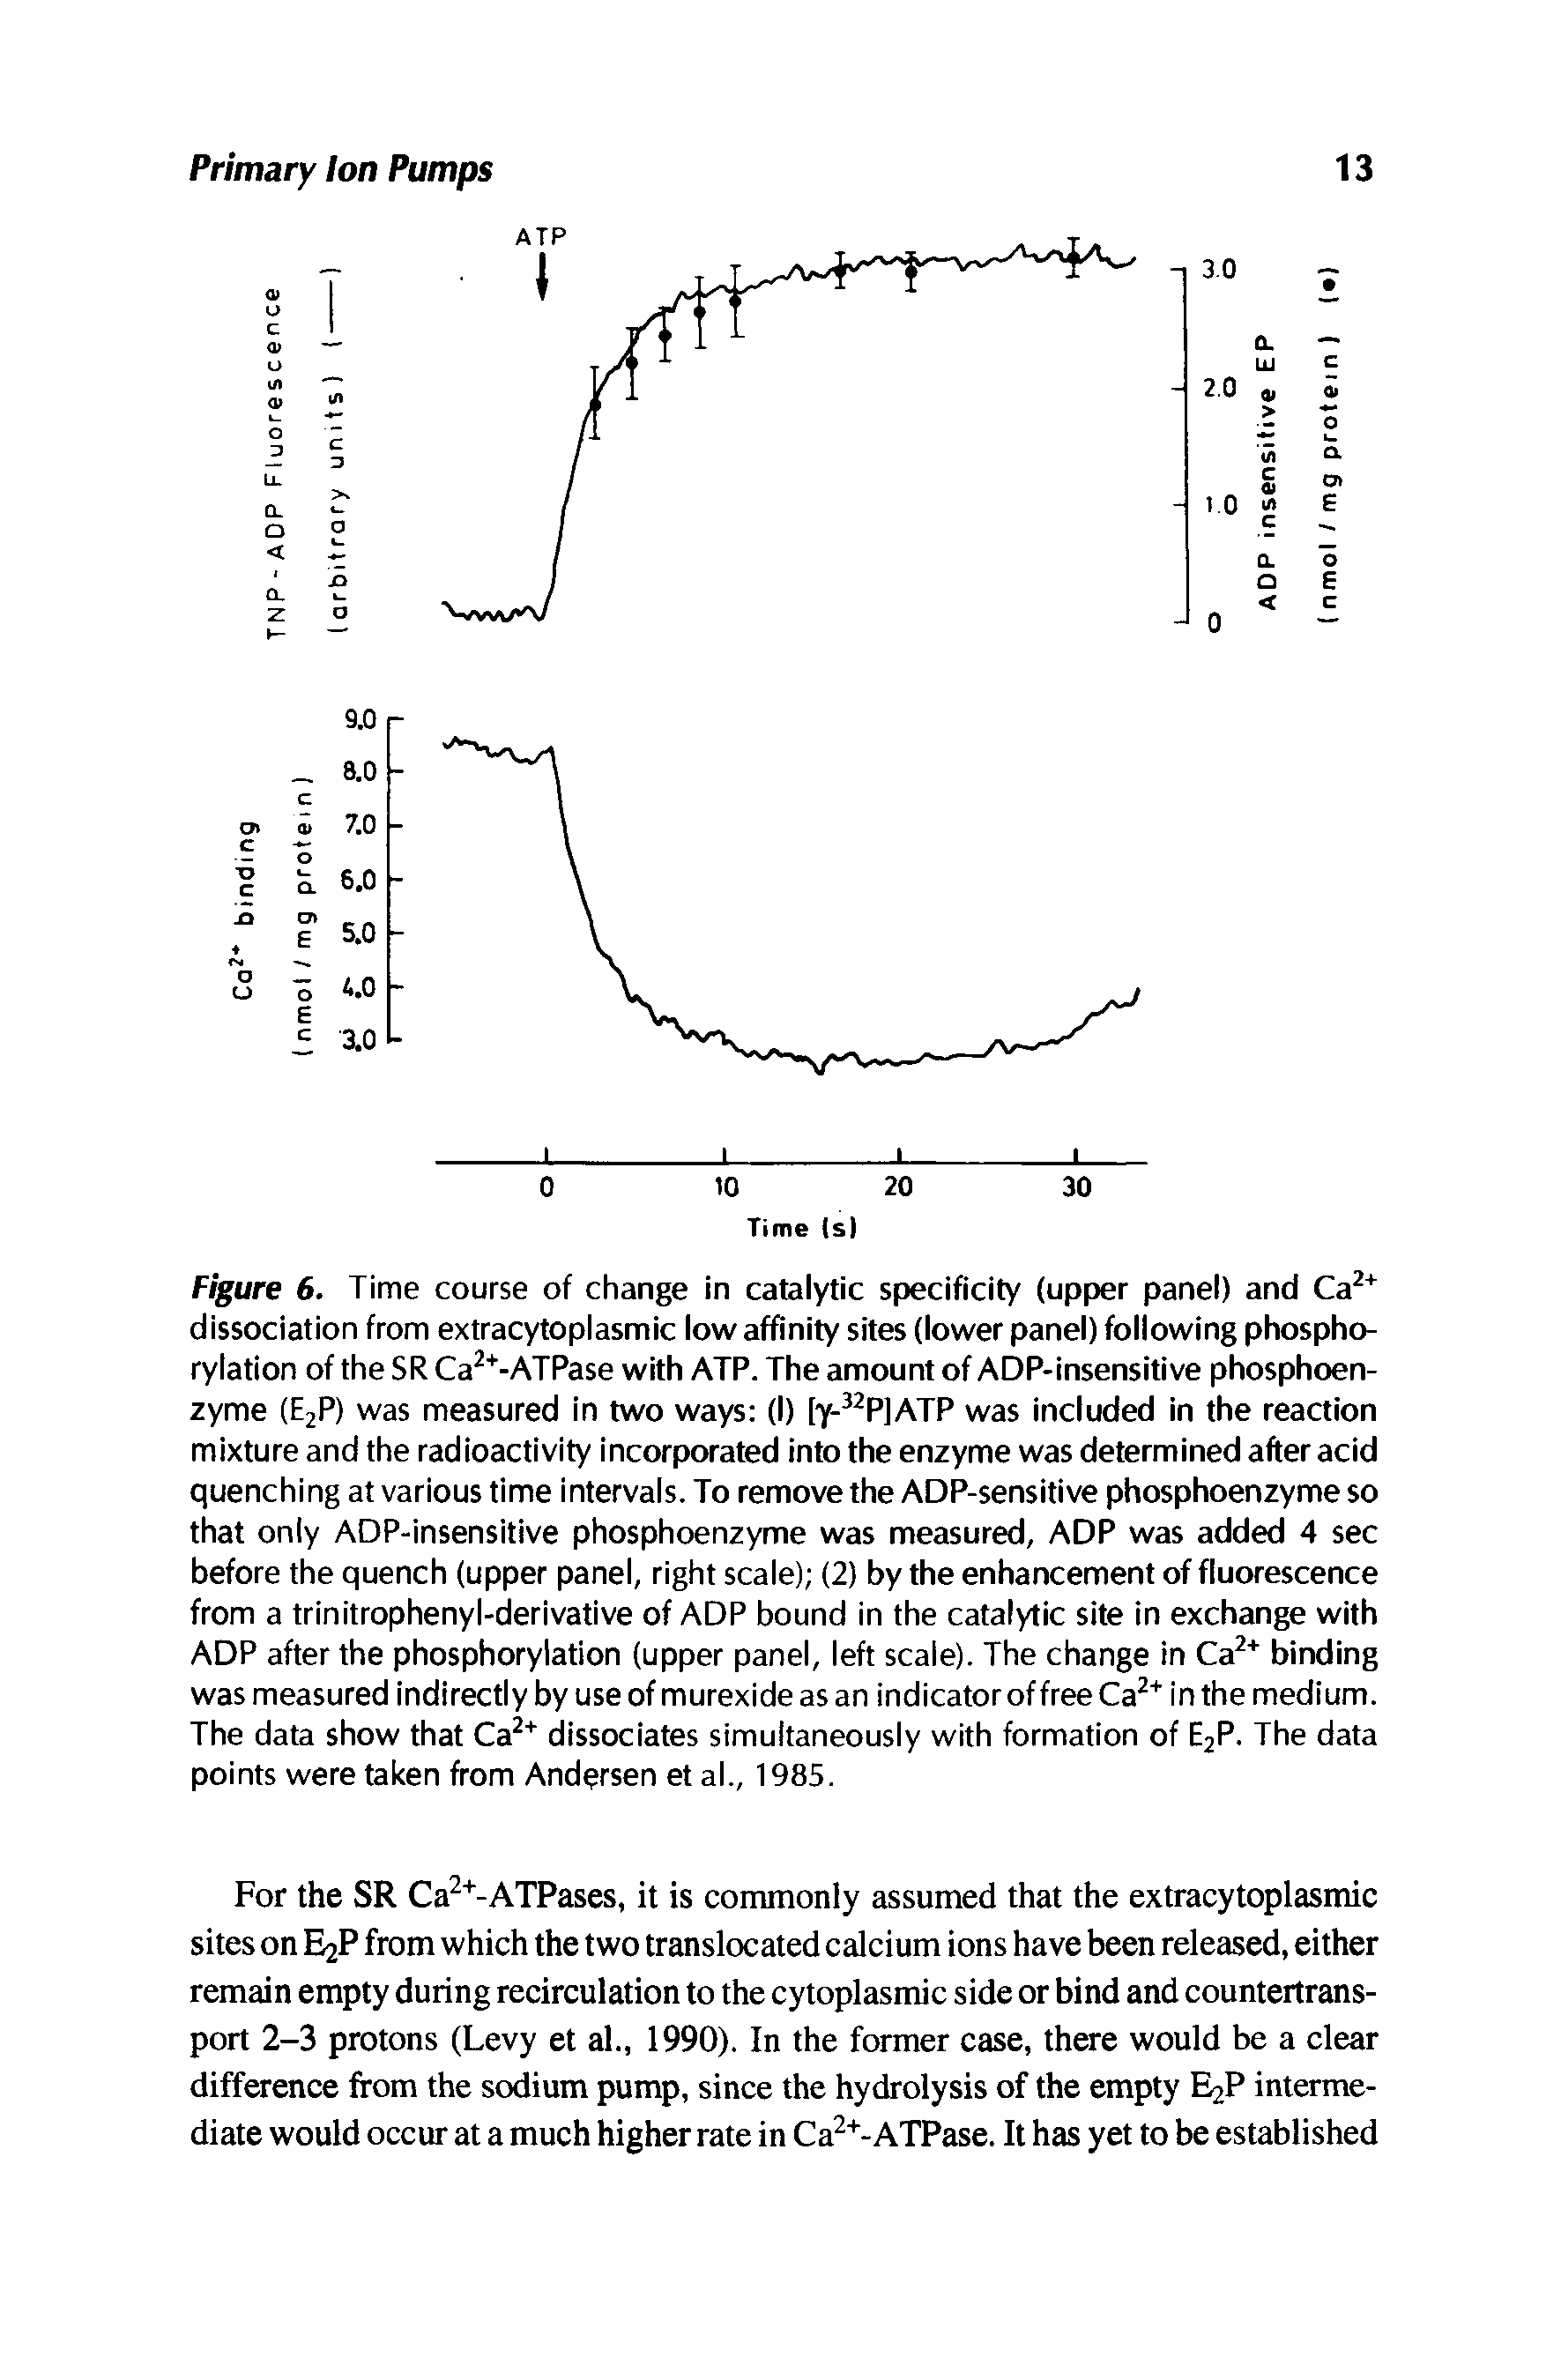 Figure 6. Time course of change in catalytic specificity (upper panel) and Ca2+ dissociation from extracytoplasmic low affinity sites (lower panel) following phosphorylation of the SR Ca2+-ATPase with ATP. The amount of ADP-insensitive phosphoen-zyme (E2P) was measured in two ways (I) [y-32P]ATP was included in the reaction mixture and the radioactivity incorporated into the enzyme was determined after acid quenching at various time intervals. To remove the ADP-sensitive phosphoenzyme so that only ADP-insensitive phosphoenzyme was measured, ADP was added 4 sec before the quench (upper panel, right scale) (2) by the enhancement of fluorescence from a trinitrophenyl-derivative of ADP bound in the catalytic site in exchange with ADP after the phosphorylation (upper panel, left scale). The change in Ca2+ binding was measured indirectly by use of murexide as an indicator of free Ca2+ in the medium. The data show that Ca2+ dissociates simultaneously with formation of E2P. The data points were taken from Andersen et al., 1985.